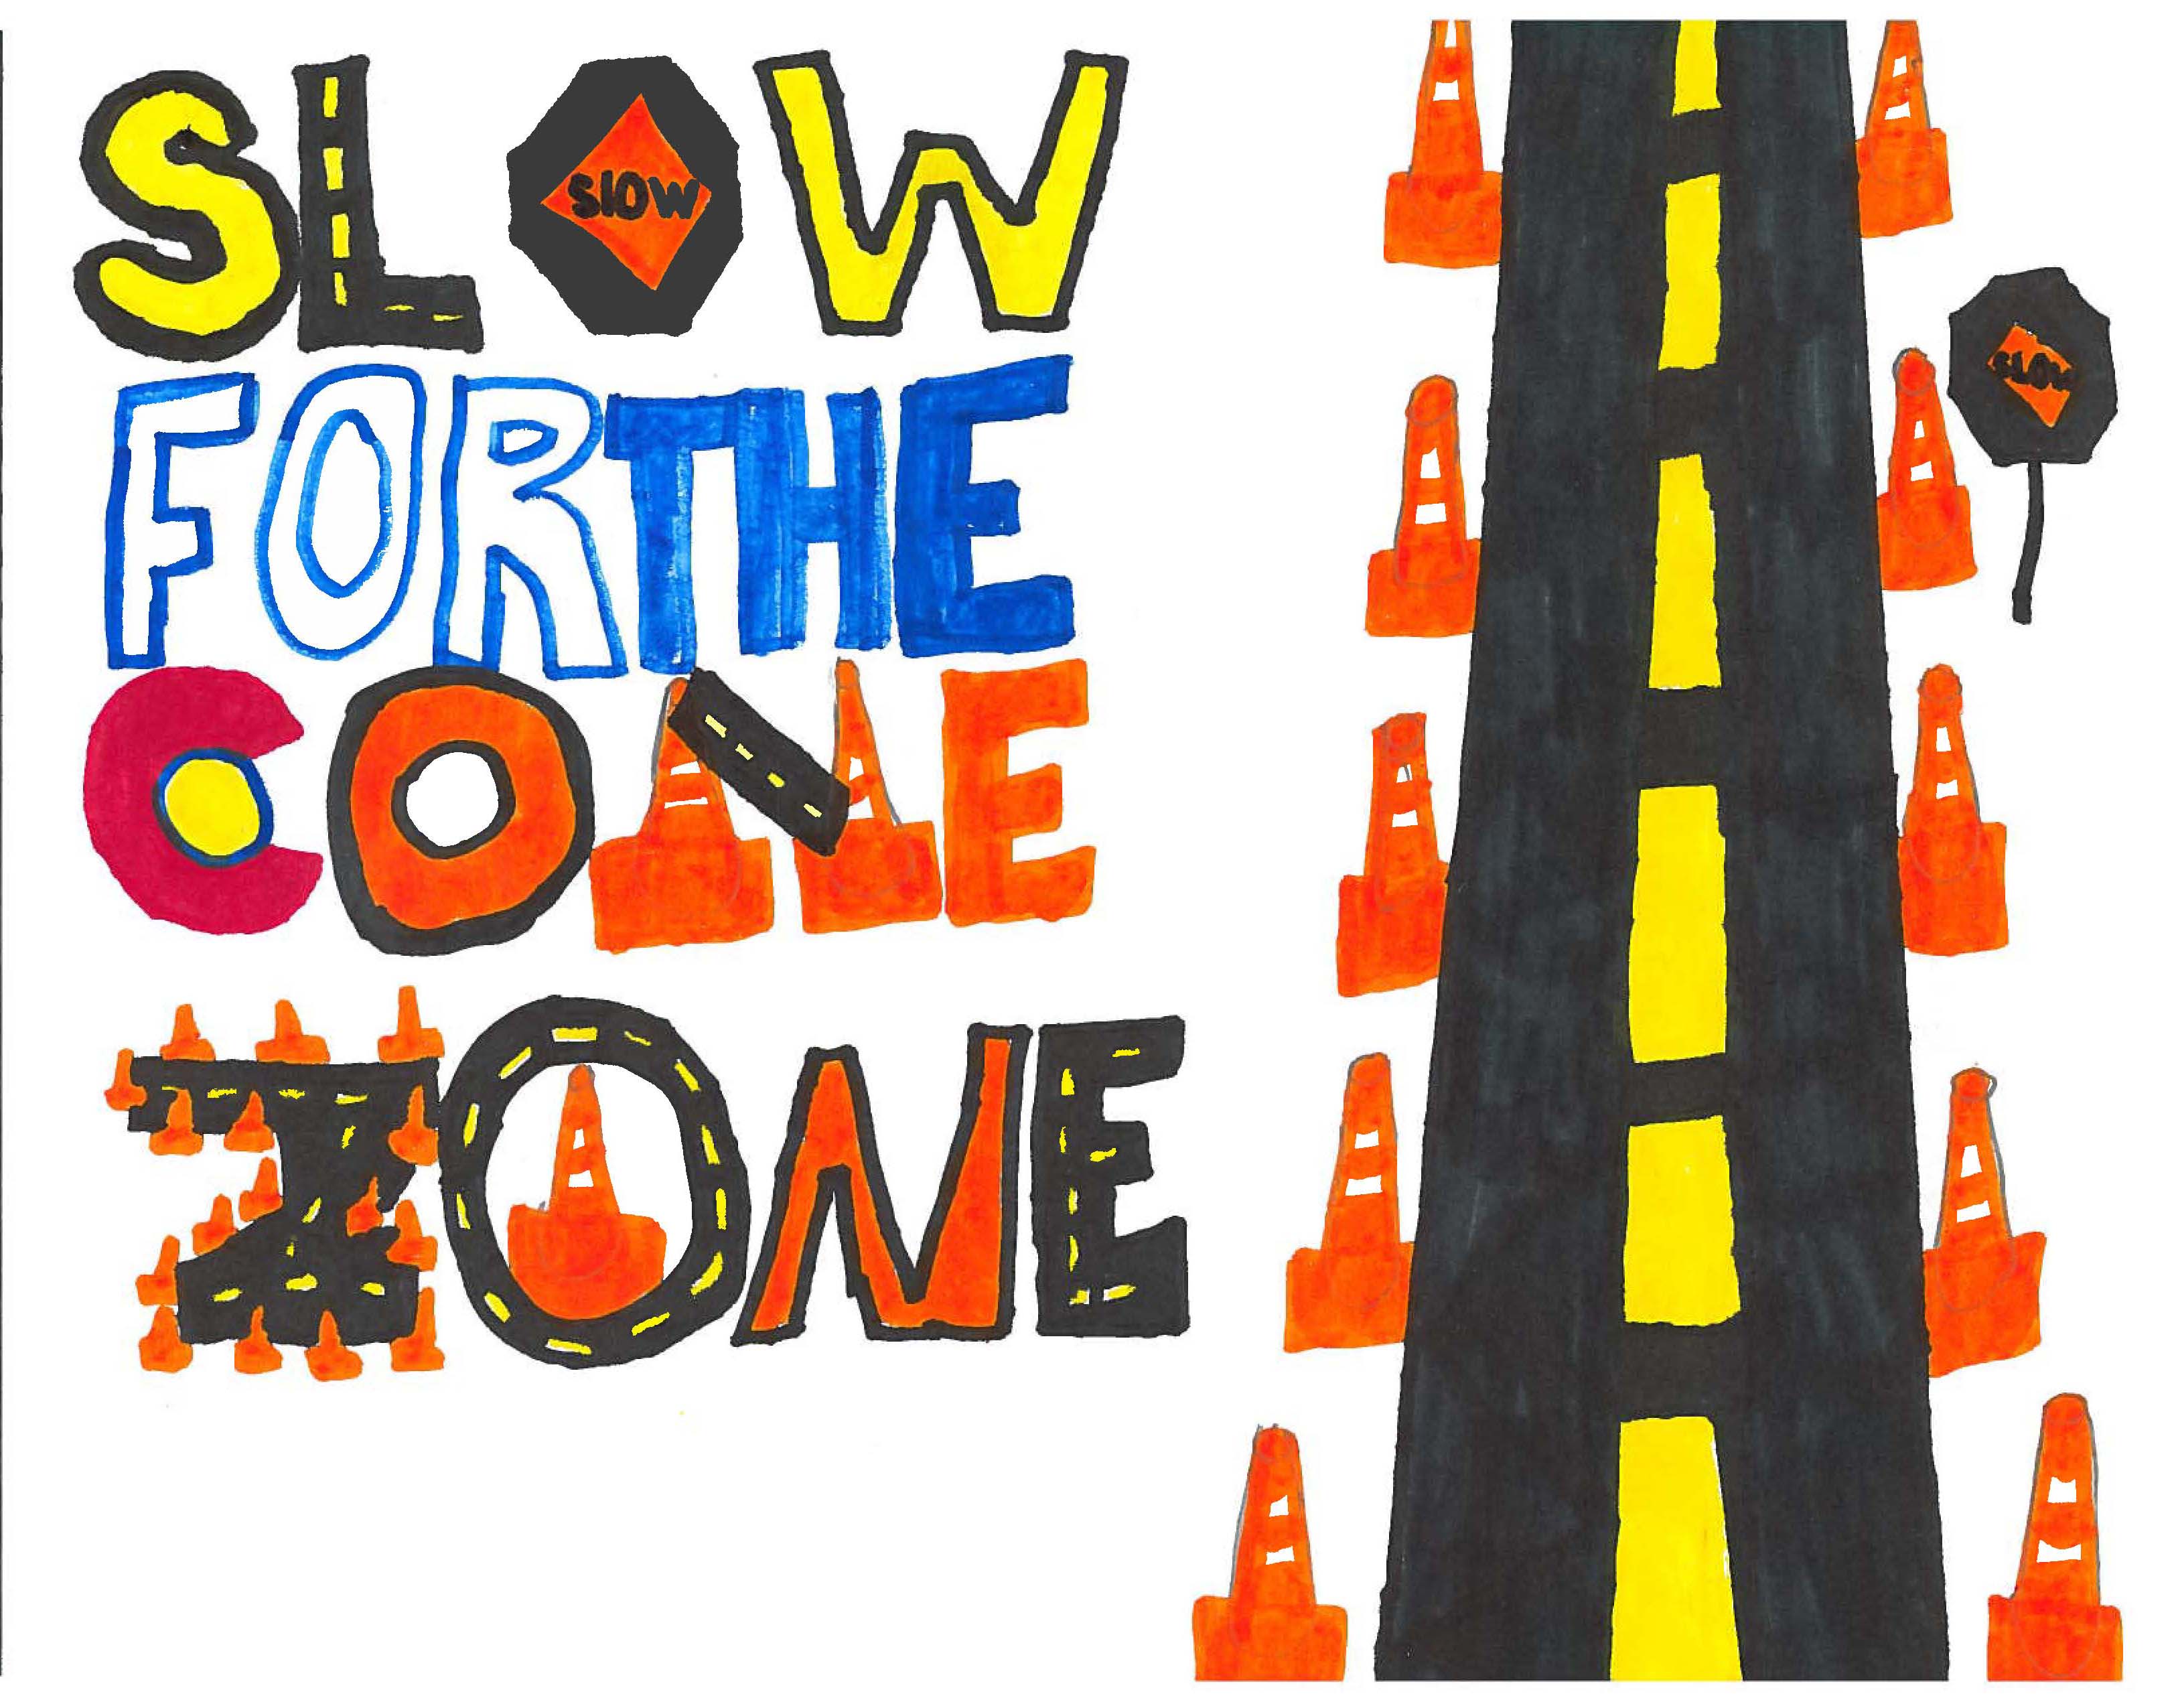 9-11 Year Old Cone Zone Poster Contest Winner detail image